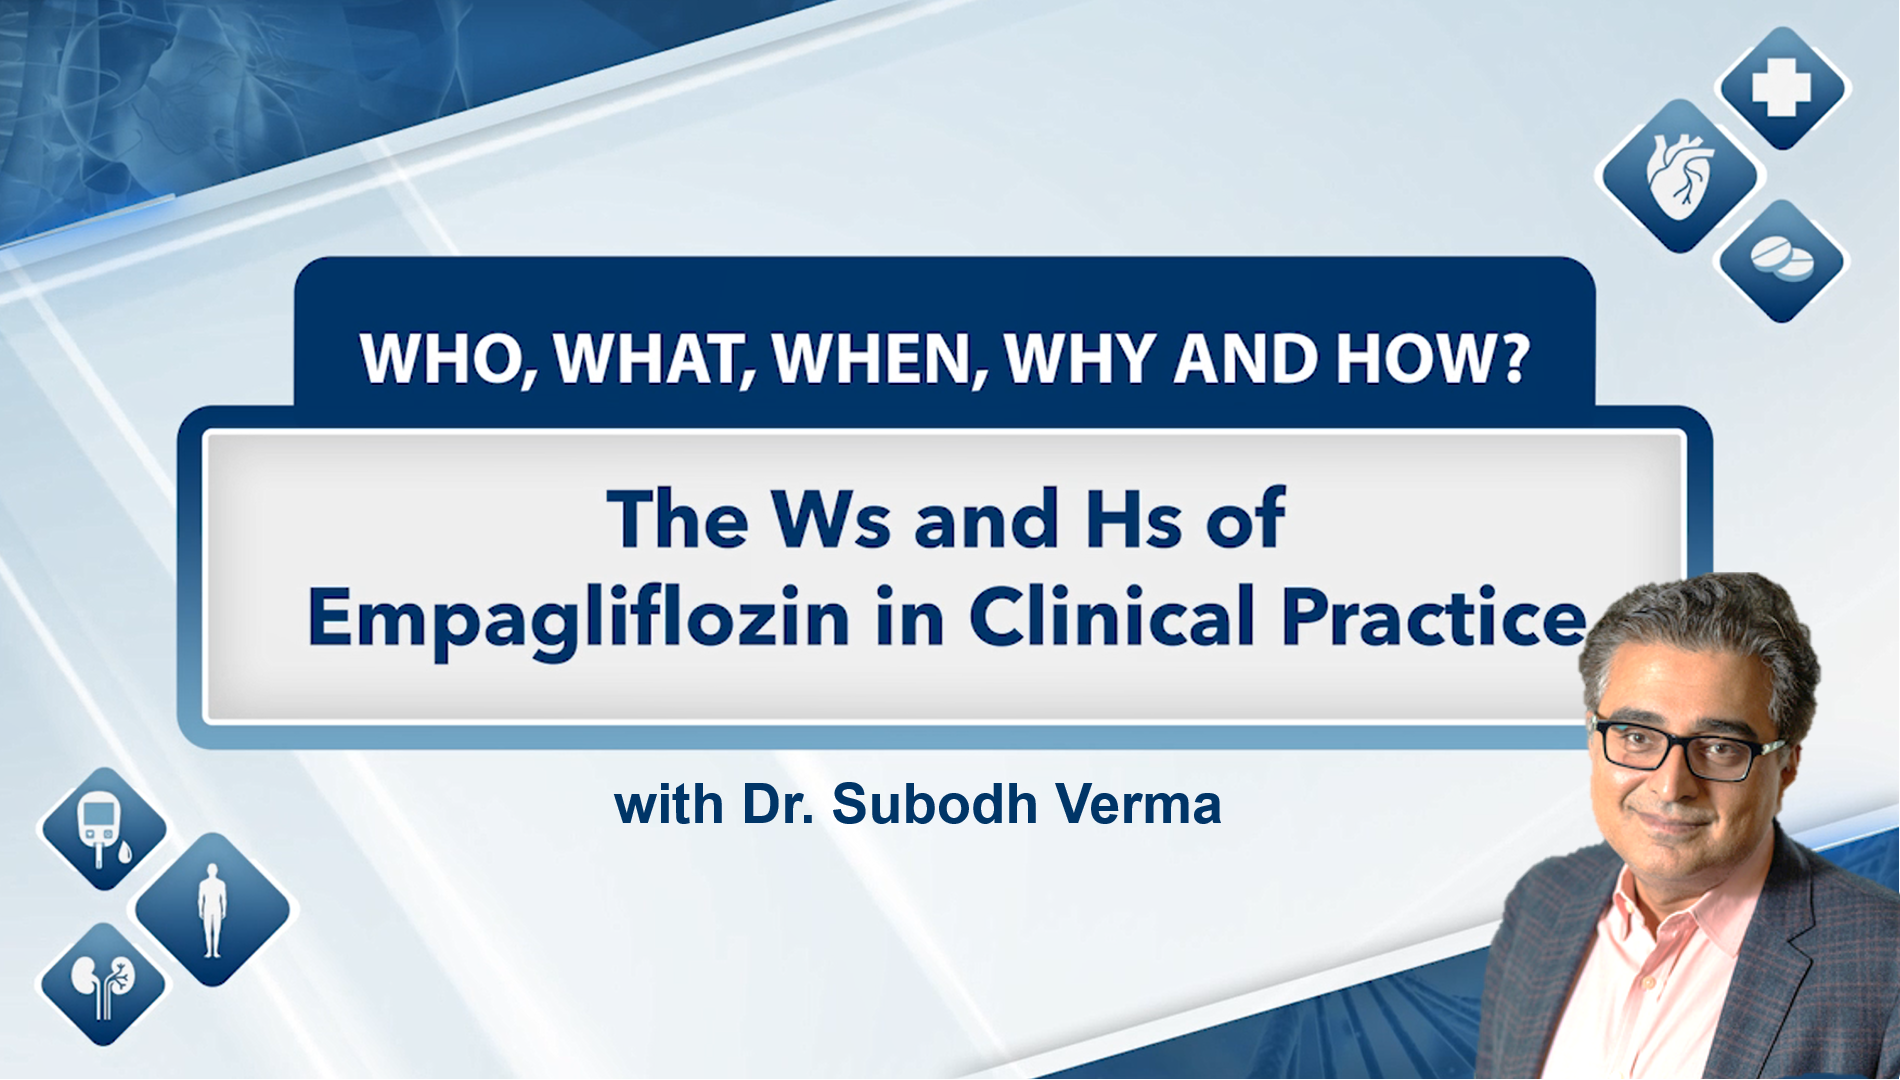 The Ws and Hs of Empagliflozin in Clinical Practice